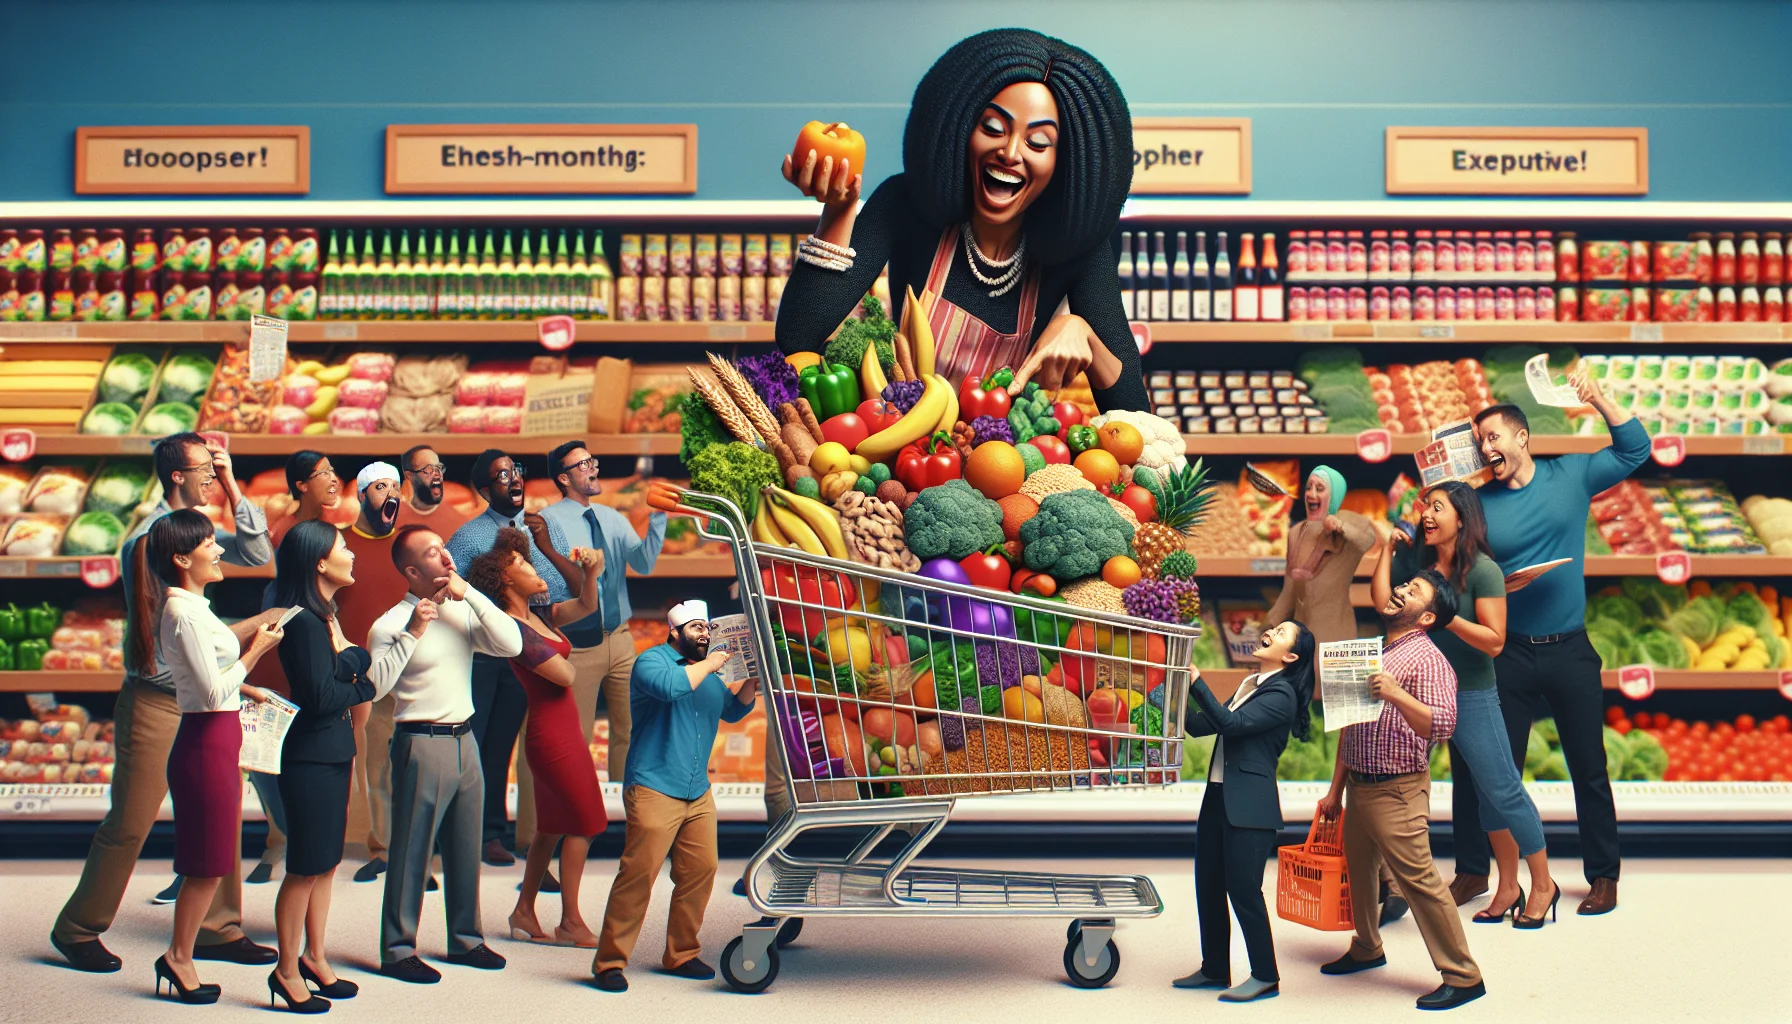 Create an image that presents Efficient Once-a-Month Shopping Tips. Specifically, incorporate a humorous situation that motivates people to adopt a healthier lifestyle while also saving money. Here’s the scenario: a Black female portrayed as the witty main character, humorously stacking a cart full of colorful vegetables, fruits, whole grains to a point of overflow, while outsmarting a label-reading Caucasian male by teaching him to choose fresh and seasonal produce over expensive processed foods. Around them, everyone in the store, consisting of Asian, Middle Eastern, and Hispanic individuals of various genders, are captivated by her advice, slowly shifting their grocery items from junk to healthy food.